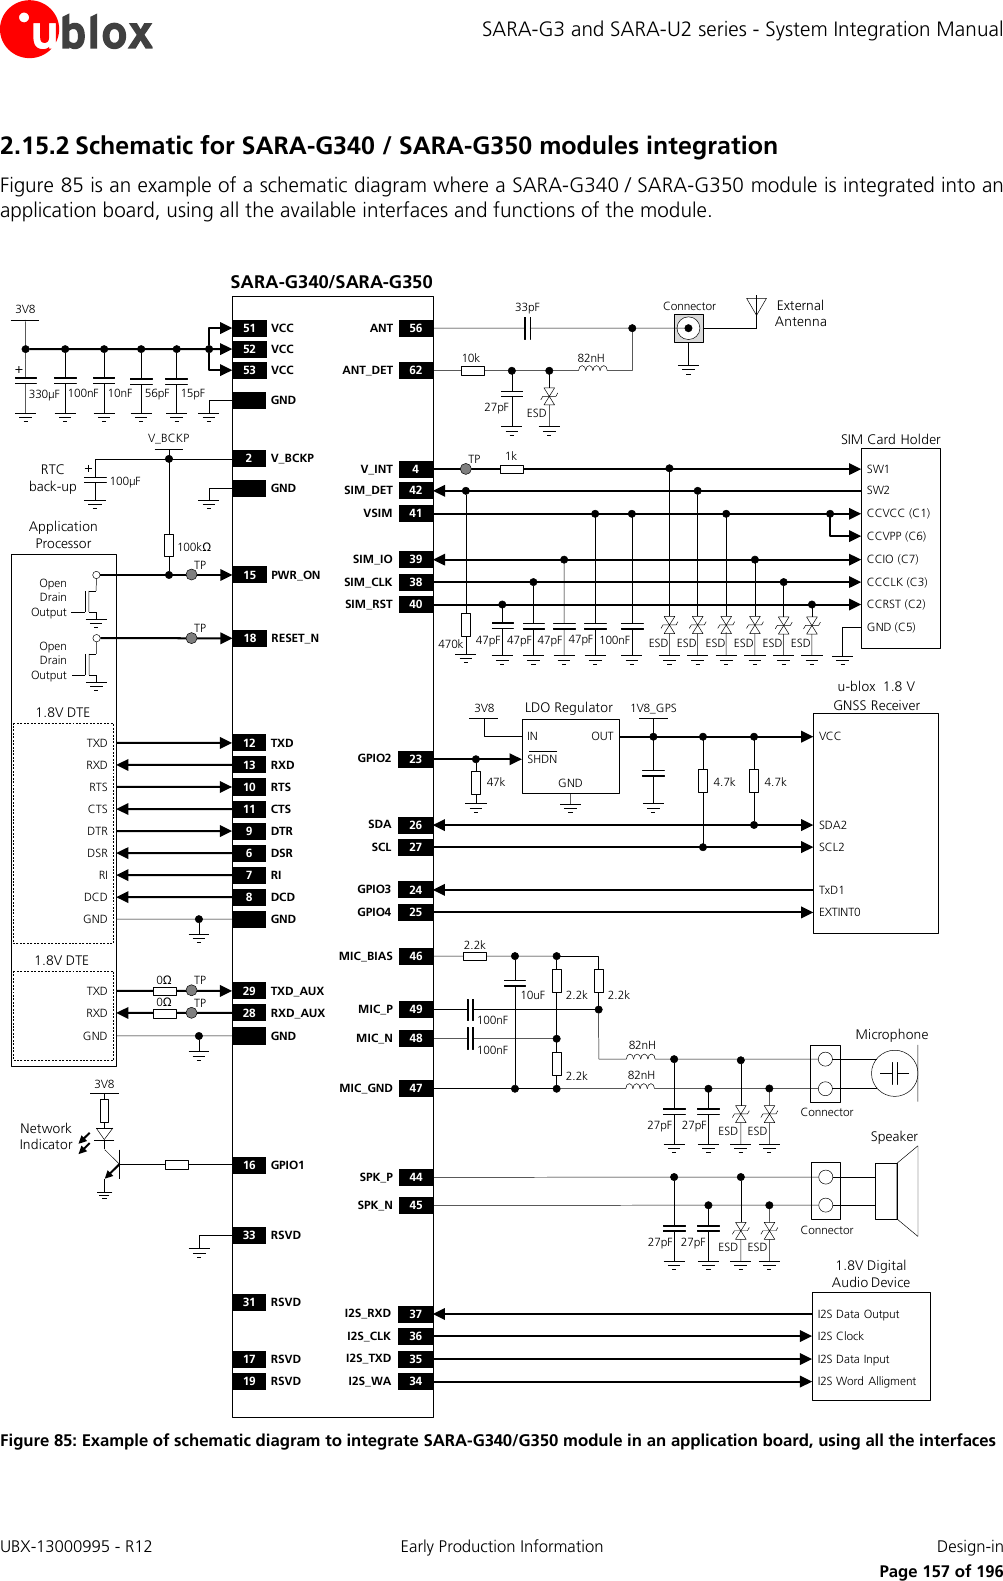 SARA-G3 and SARA-U2 series - System Integration Manual 2.15.2 Schematic for SARA-G340 / SARA-G350 modules integration Figure 85 is an example of a schematic diagram where a SARA-G340 / SARA-G350 module is integrated into an application board, using all the available interfaces and functions of the module.  TXDRXDRTSCTSDTRDSRRIDCDGND12 TXD9DTR13 RXD10 RTS11 CTS6DSR7RI8DCDGND3V8GND330µF 10nF100nF 56pFSARA-G340/SARA-G35052 VCC53 VCC51 VCC+100µF2V_BCKPGND GNDGNDRTC back-up1.8V DTE1.8V DTE16 GPIO13V8Network Indicator18 RESET_NApplication ProcessorOpen Drain Output15 PWR_ON100kΩOpen Drain OutputTXDRXD29 TXD_AUX28 RXD_AUX0Ω0ΩTPTPu-blox  1.8 V GNSS Receiver4.7kOUTINGNDLDO RegulatorSHDNSDASCL4.7k3V8 1V8_GPSSDA2SCL2GPIO3GPIO4TxD1EXTINT02627242547kVCCGPIO2 231.8V Digital Audio DeviceI2S_RXDI2S_CLKI2S Data OutputI2S ClockI2S_TXDI2S_WAI2S Data InputI2S Word Alligment3736353449MIC_P2.2k2.2k 2.2k48MIC_N2.2k10uF46MIC_BIAS47MIC_GND100nF100nF44SPK_P45SPK_N82nH82nH27pF27pFConnectorMicrophoneESDESD27pF 27pFSpeakerConnectorESD ESD15pF33 RSVD31 RSVD17 RSVD19 RSVD47pFSIM Card HolderCCVCC (C1)CCVPP (C6)CCIO (C7)CCCLK (C3)CCRST (C2)GND (C5)47pF 47pF 100nF41VSIM39SIM_IO38SIM_CLK40SIM_RST47pFSW1 SW24V_INT42SIM_DET470k ESD ESD ESD ESD ESD ESD56ANT62ANT_DET10k 82nH33pF Connector27pF ESDExternal AntennaV_BCKP1kTPTPTP Figure 85: Example of schematic diagram to integrate SARA-G340/G350 module in an application board, using all the interfaces  UBX-13000995 - R12 Early Production Information Design-in     Page 157 of 196 